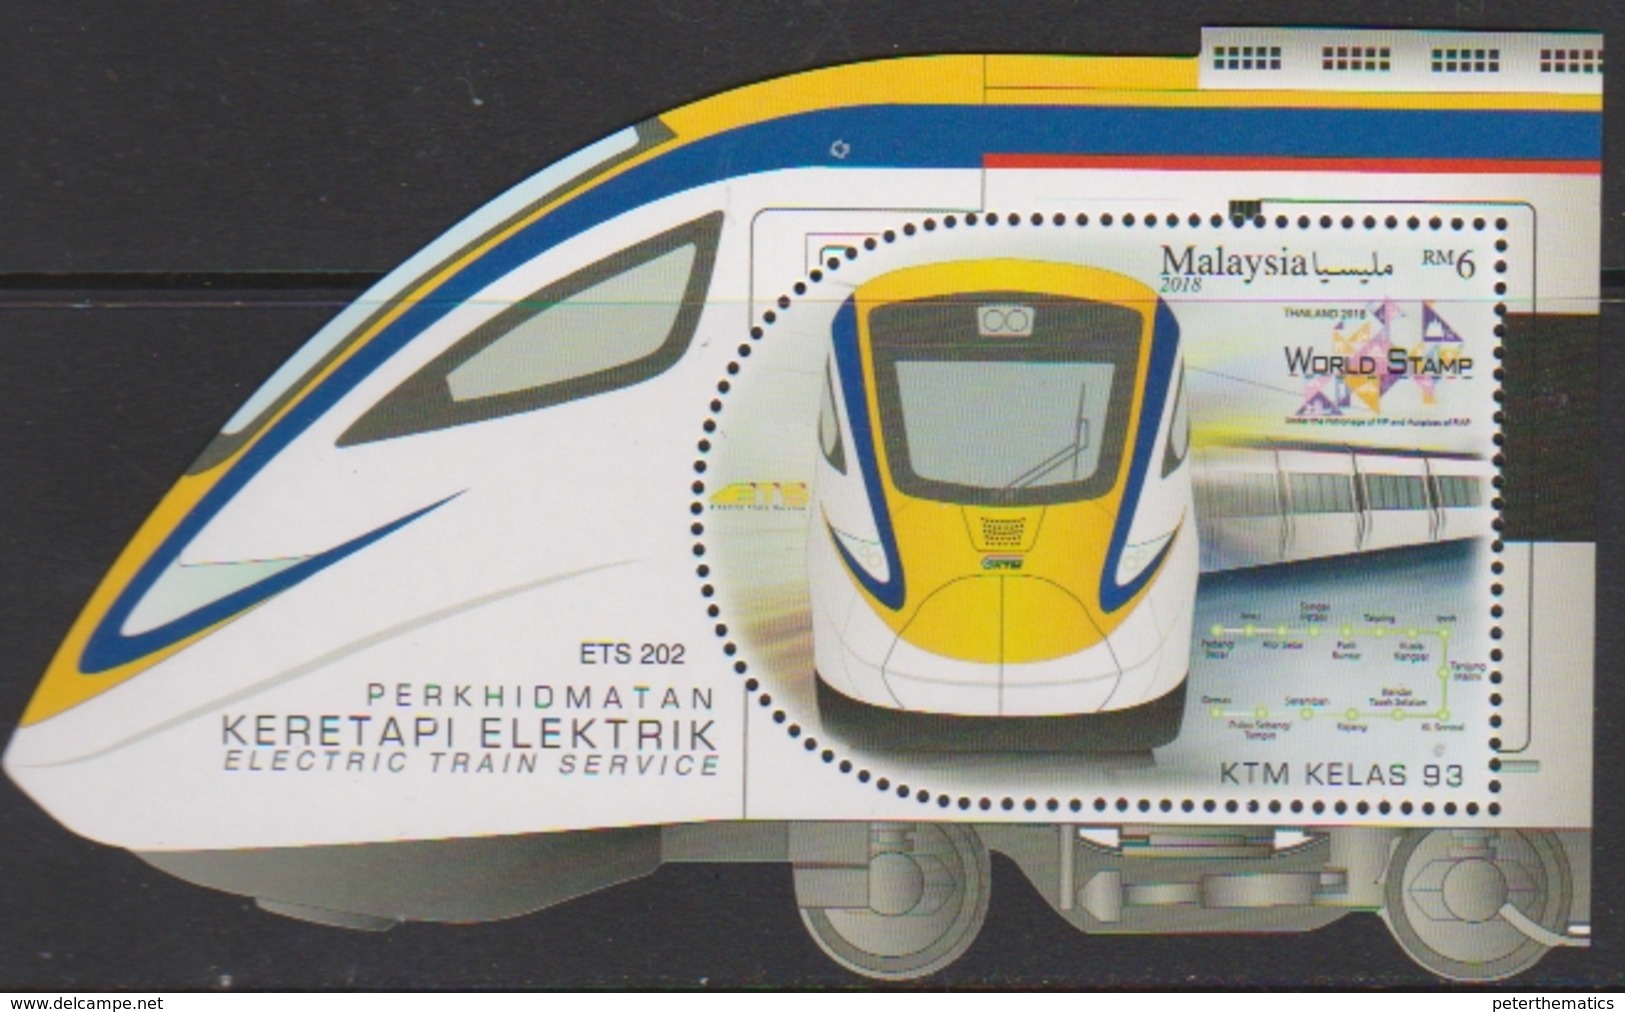 MALAYSIA, 2019, TRAINS, WORLD STAMP EXHIBITION OVERPRINT, TRAINED-SHAPED S/SHEET - Trains